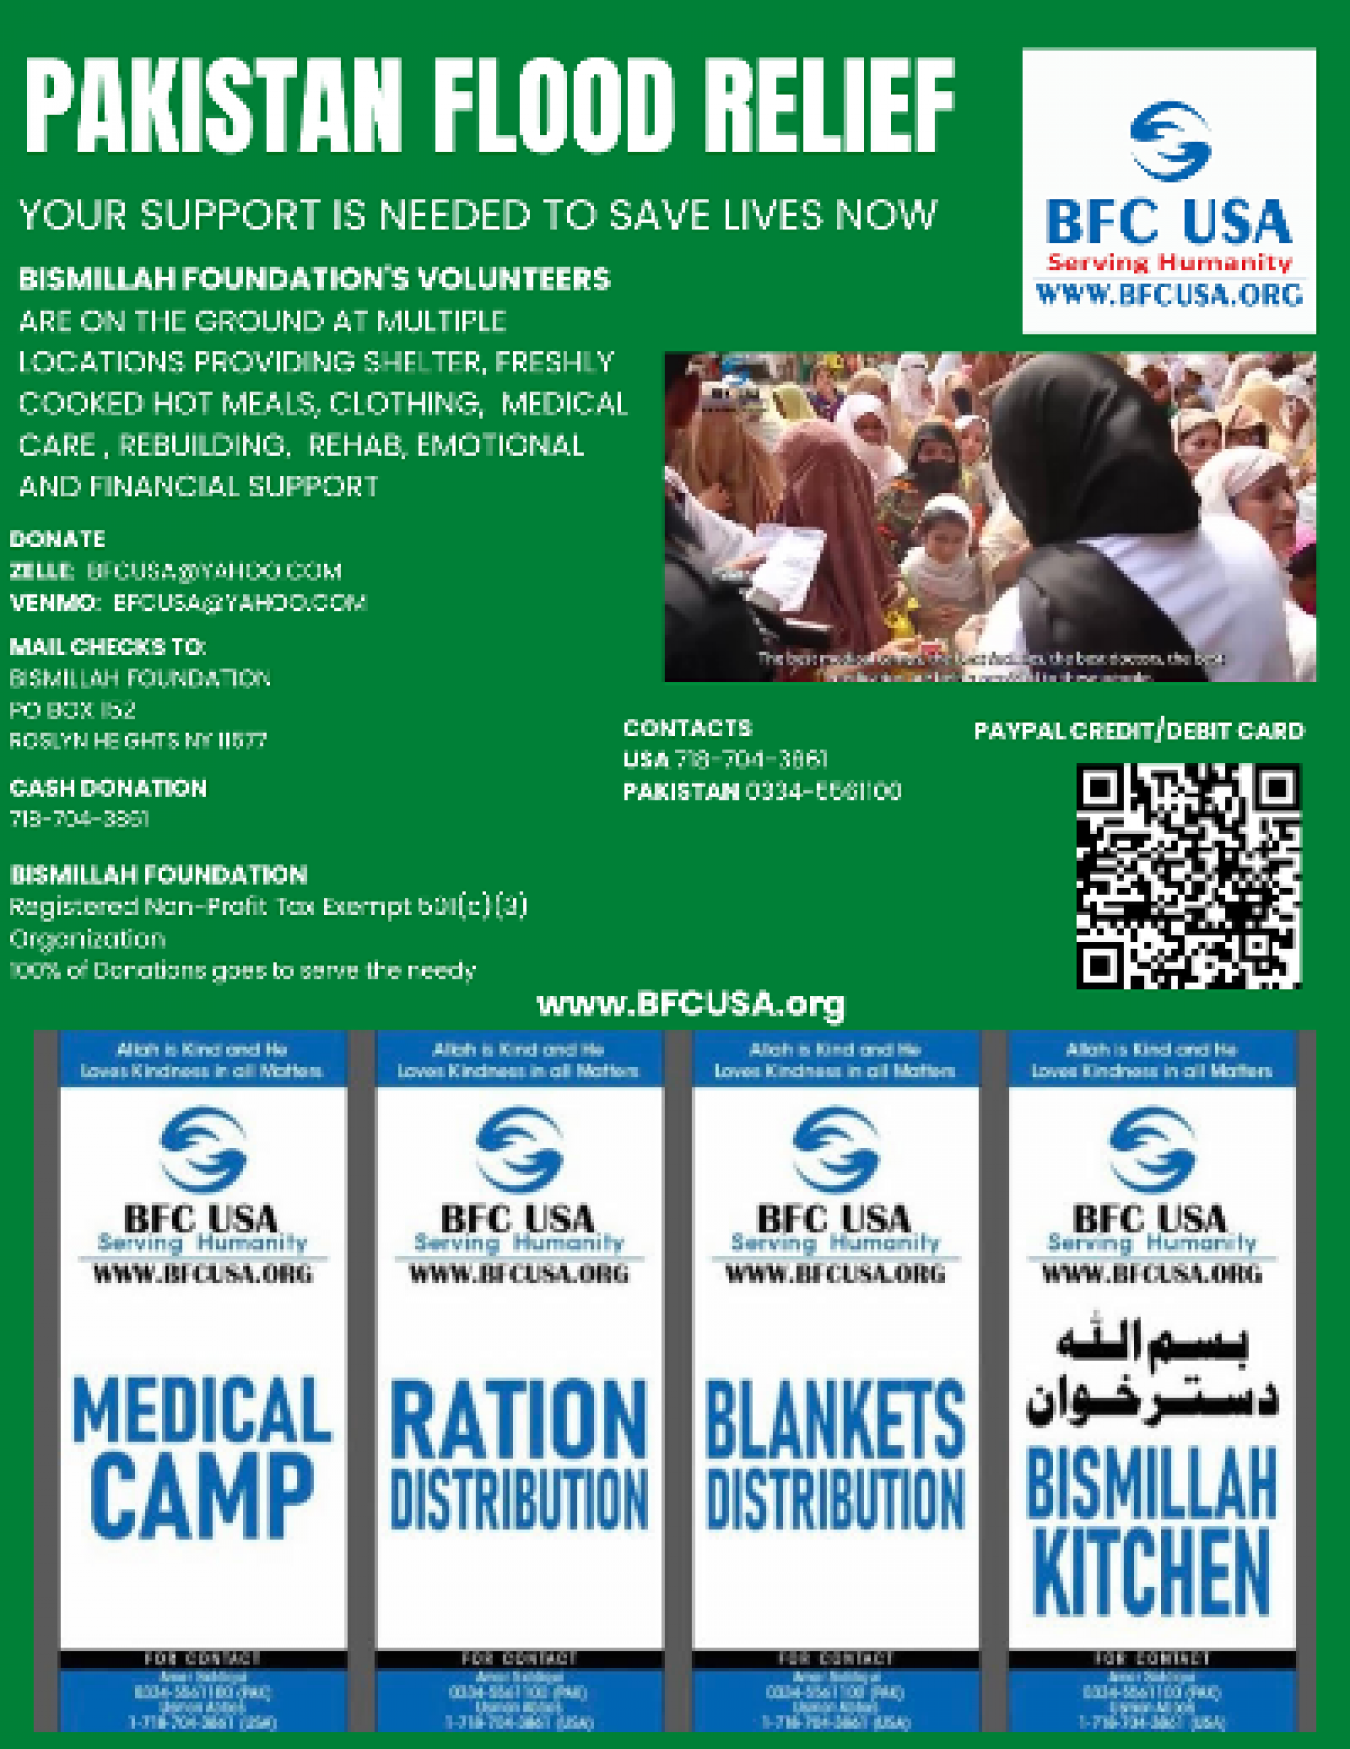 media_219_BFCUSA-PAKISTAN-FLOOD-RELIEF-FLYER.png